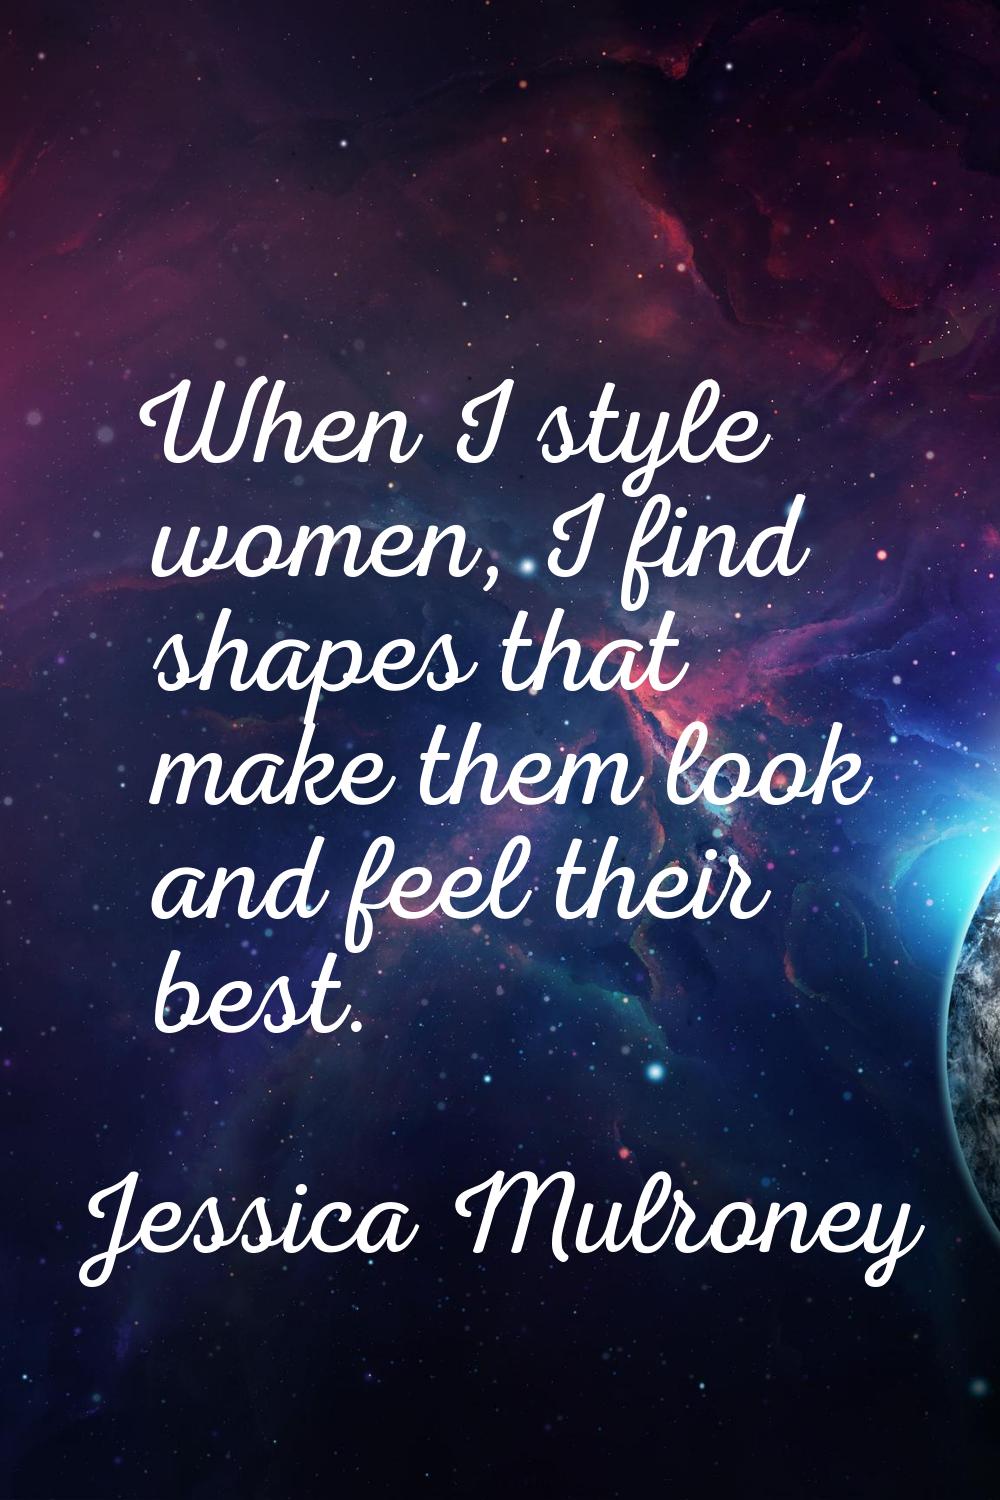 When I style women, I find shapes that make them look and feel their best.